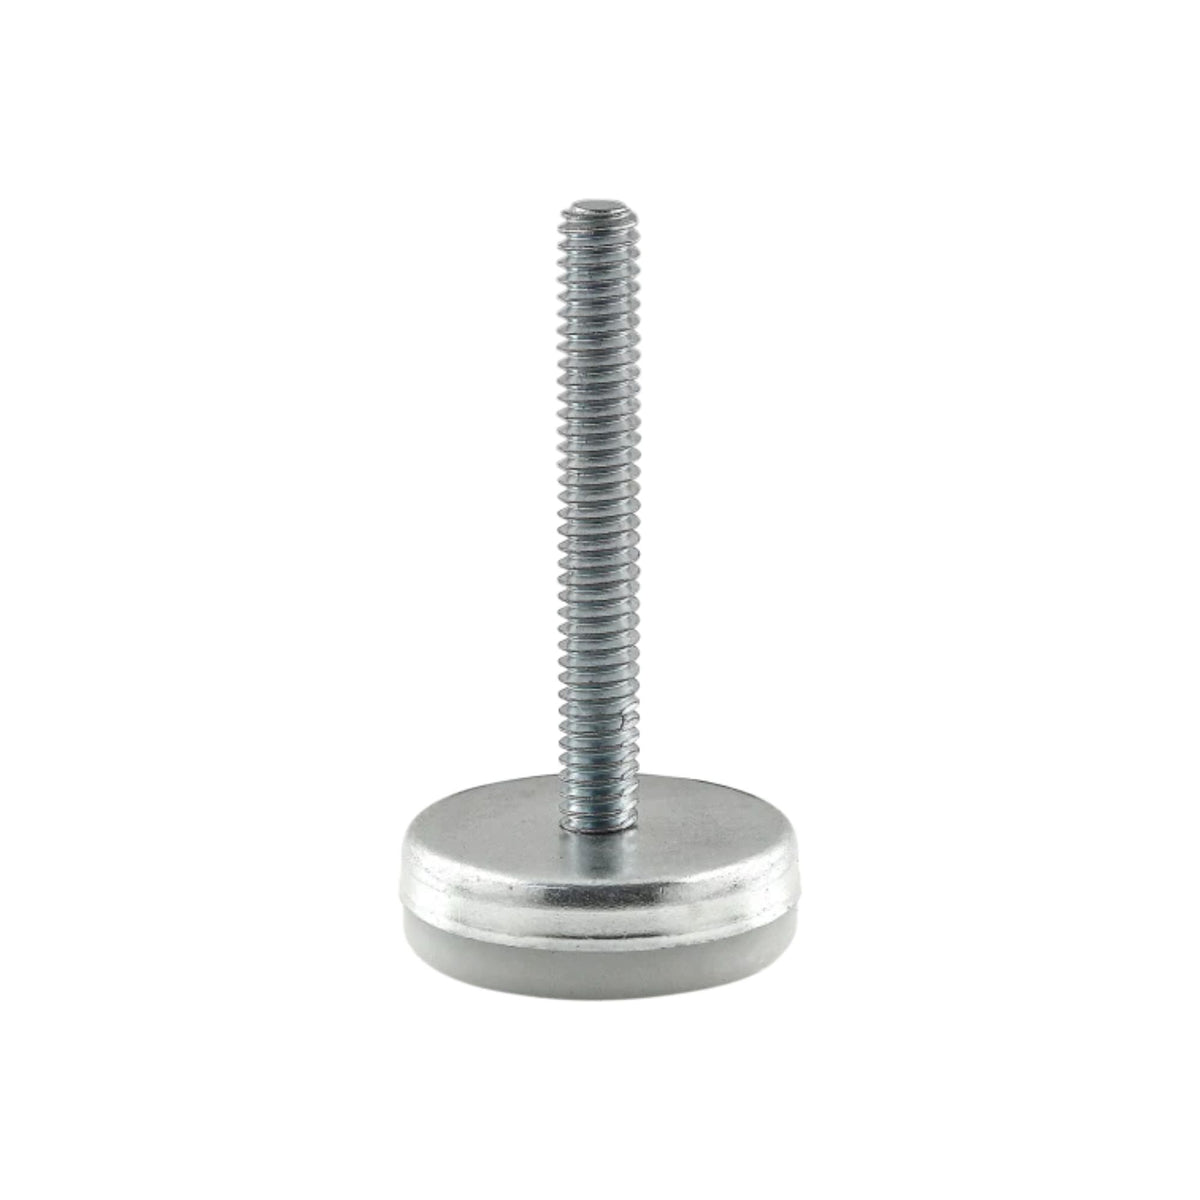 round nickel plated metal base at the bottom with a long threaded stem inserted into the middle